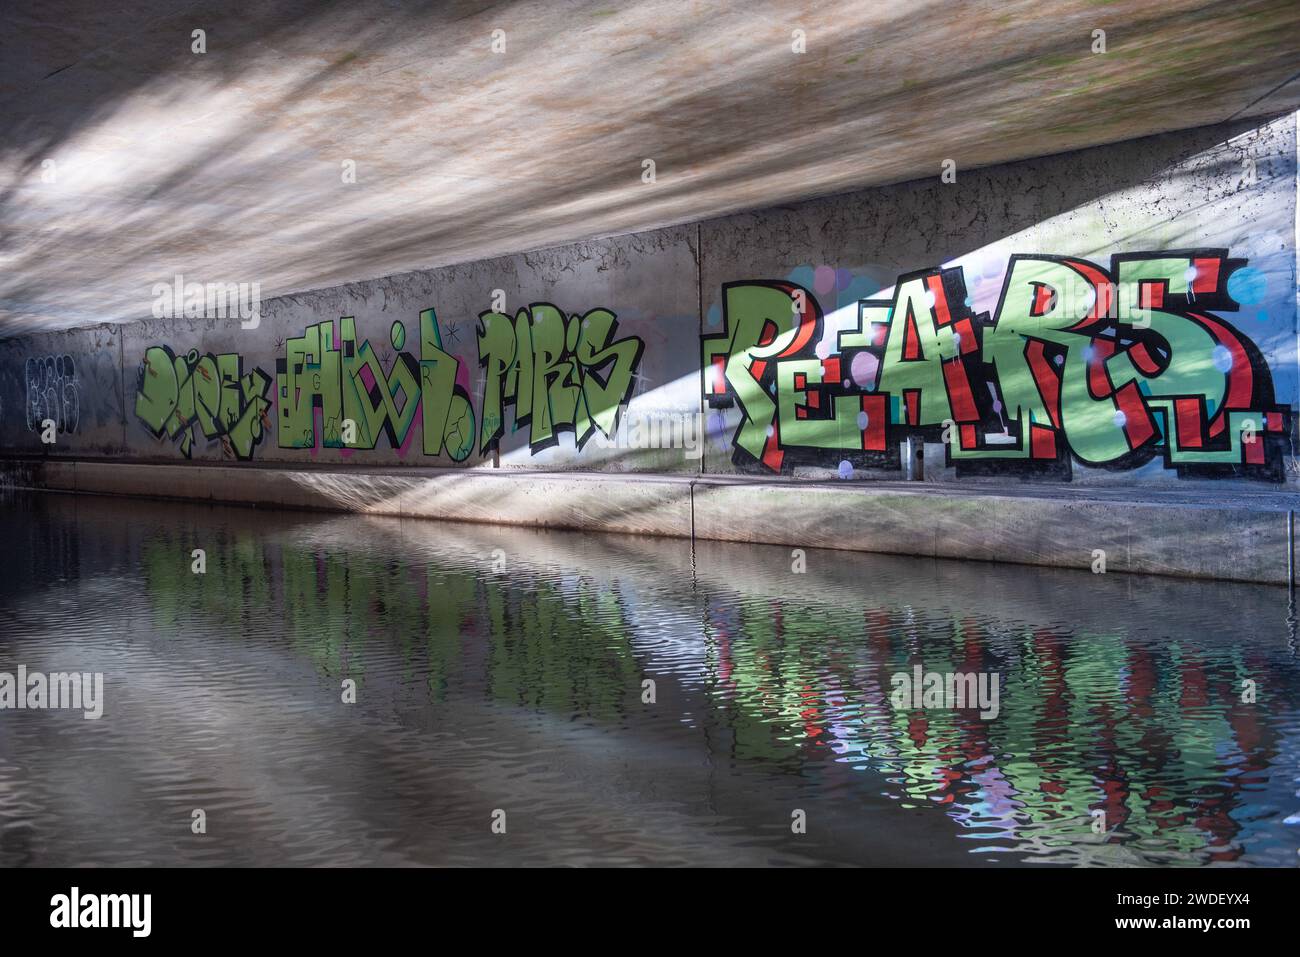 Graffiti writing on walls of canal tunnel, with water reflections Stock Photo